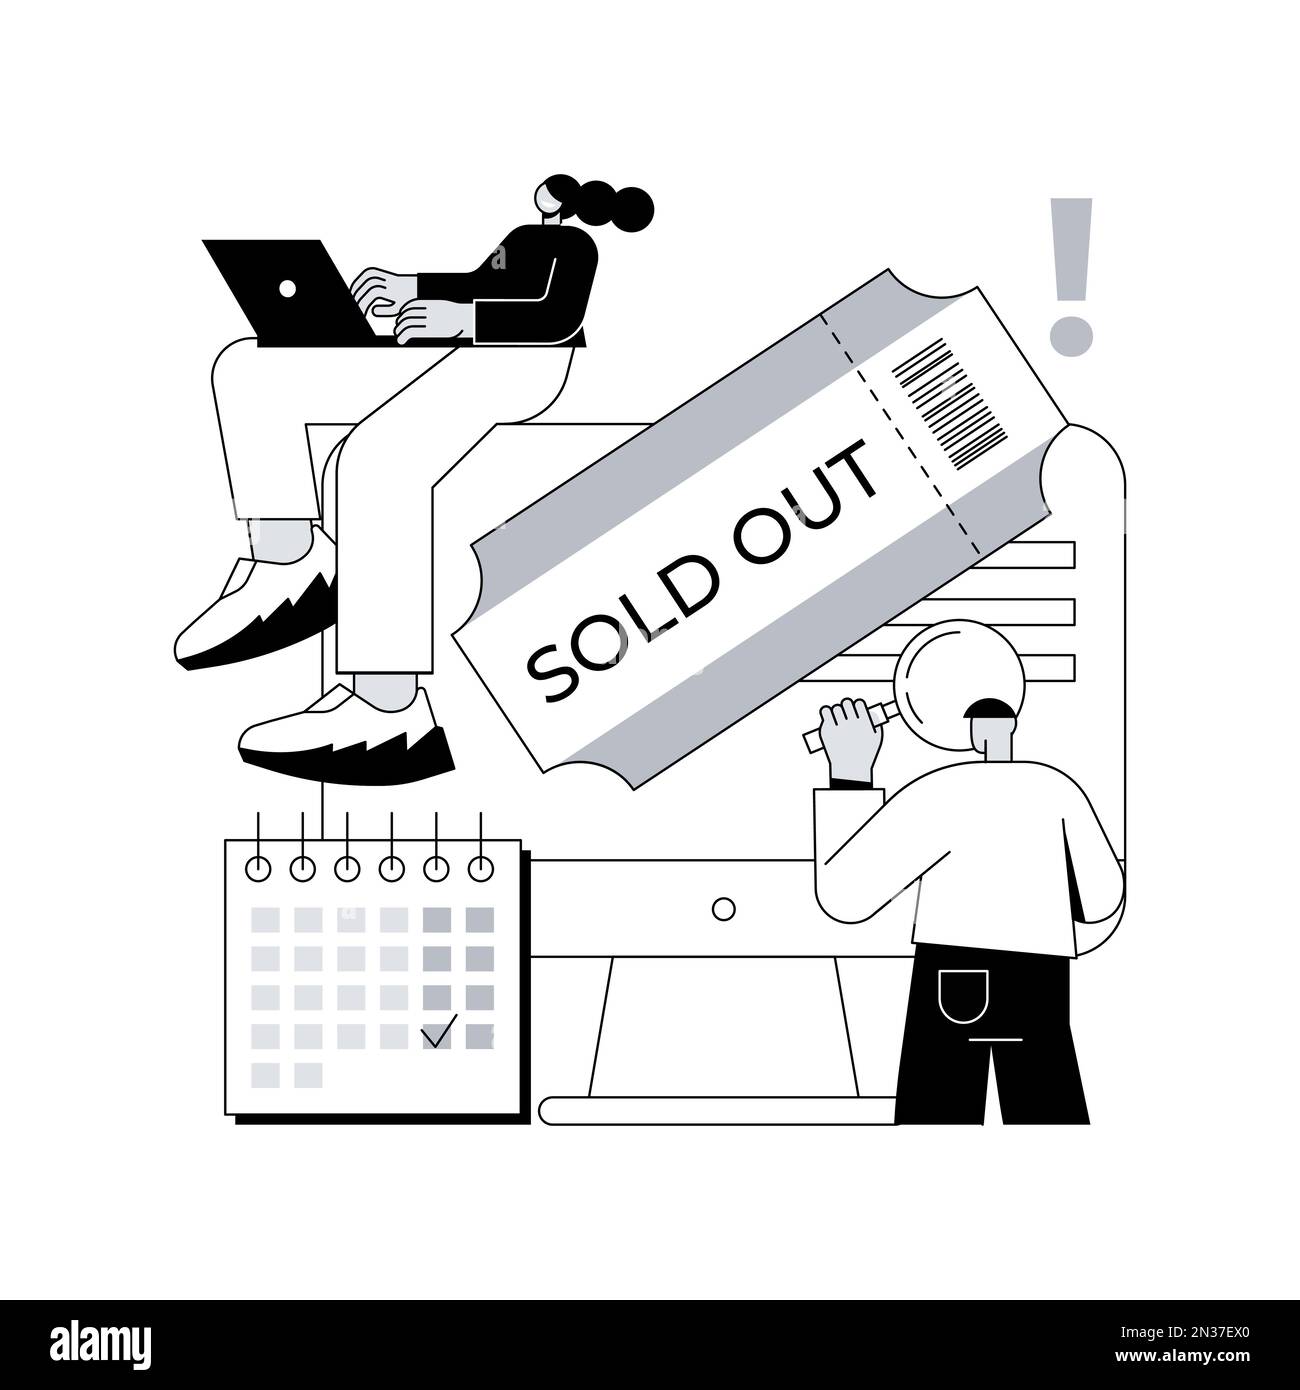 Sold-out event abstract concept vector illustration. We are sold-out, no tickets available, full venue, overbooking, premiere event, festival big success, popular show, tour gig abstract metaphor. Stock Vector